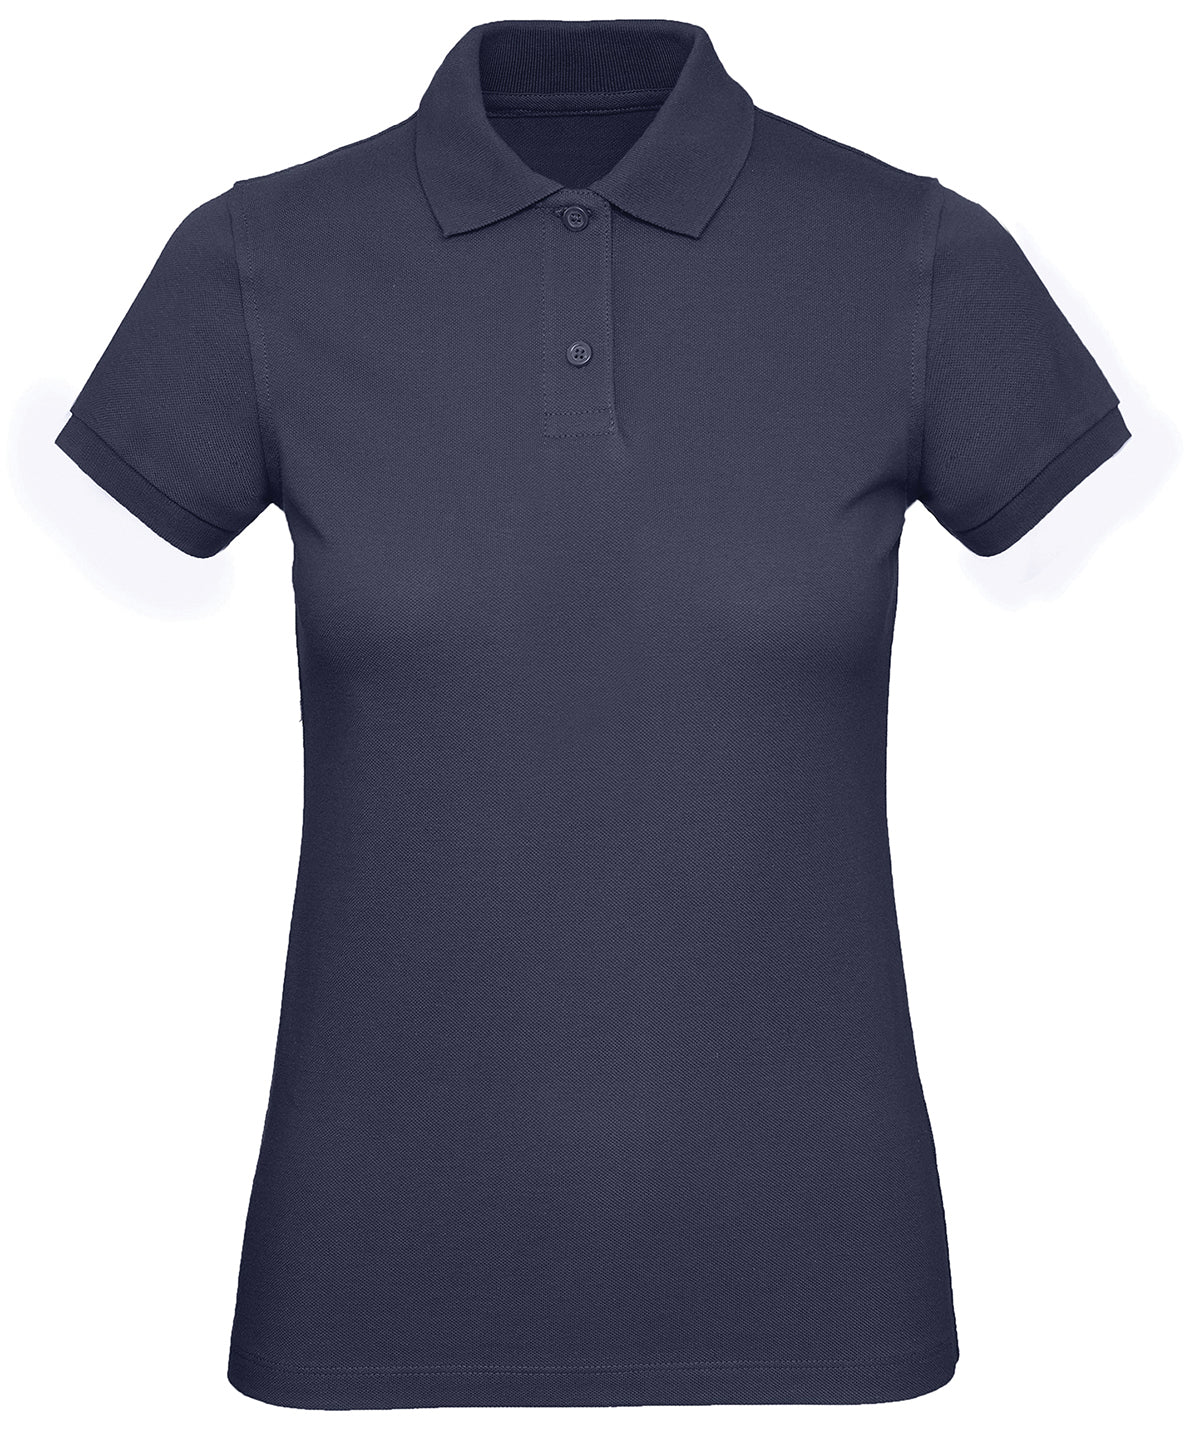 Personalised Polo Shirts - Navy B&C Collection B&C Inspire Polo /women